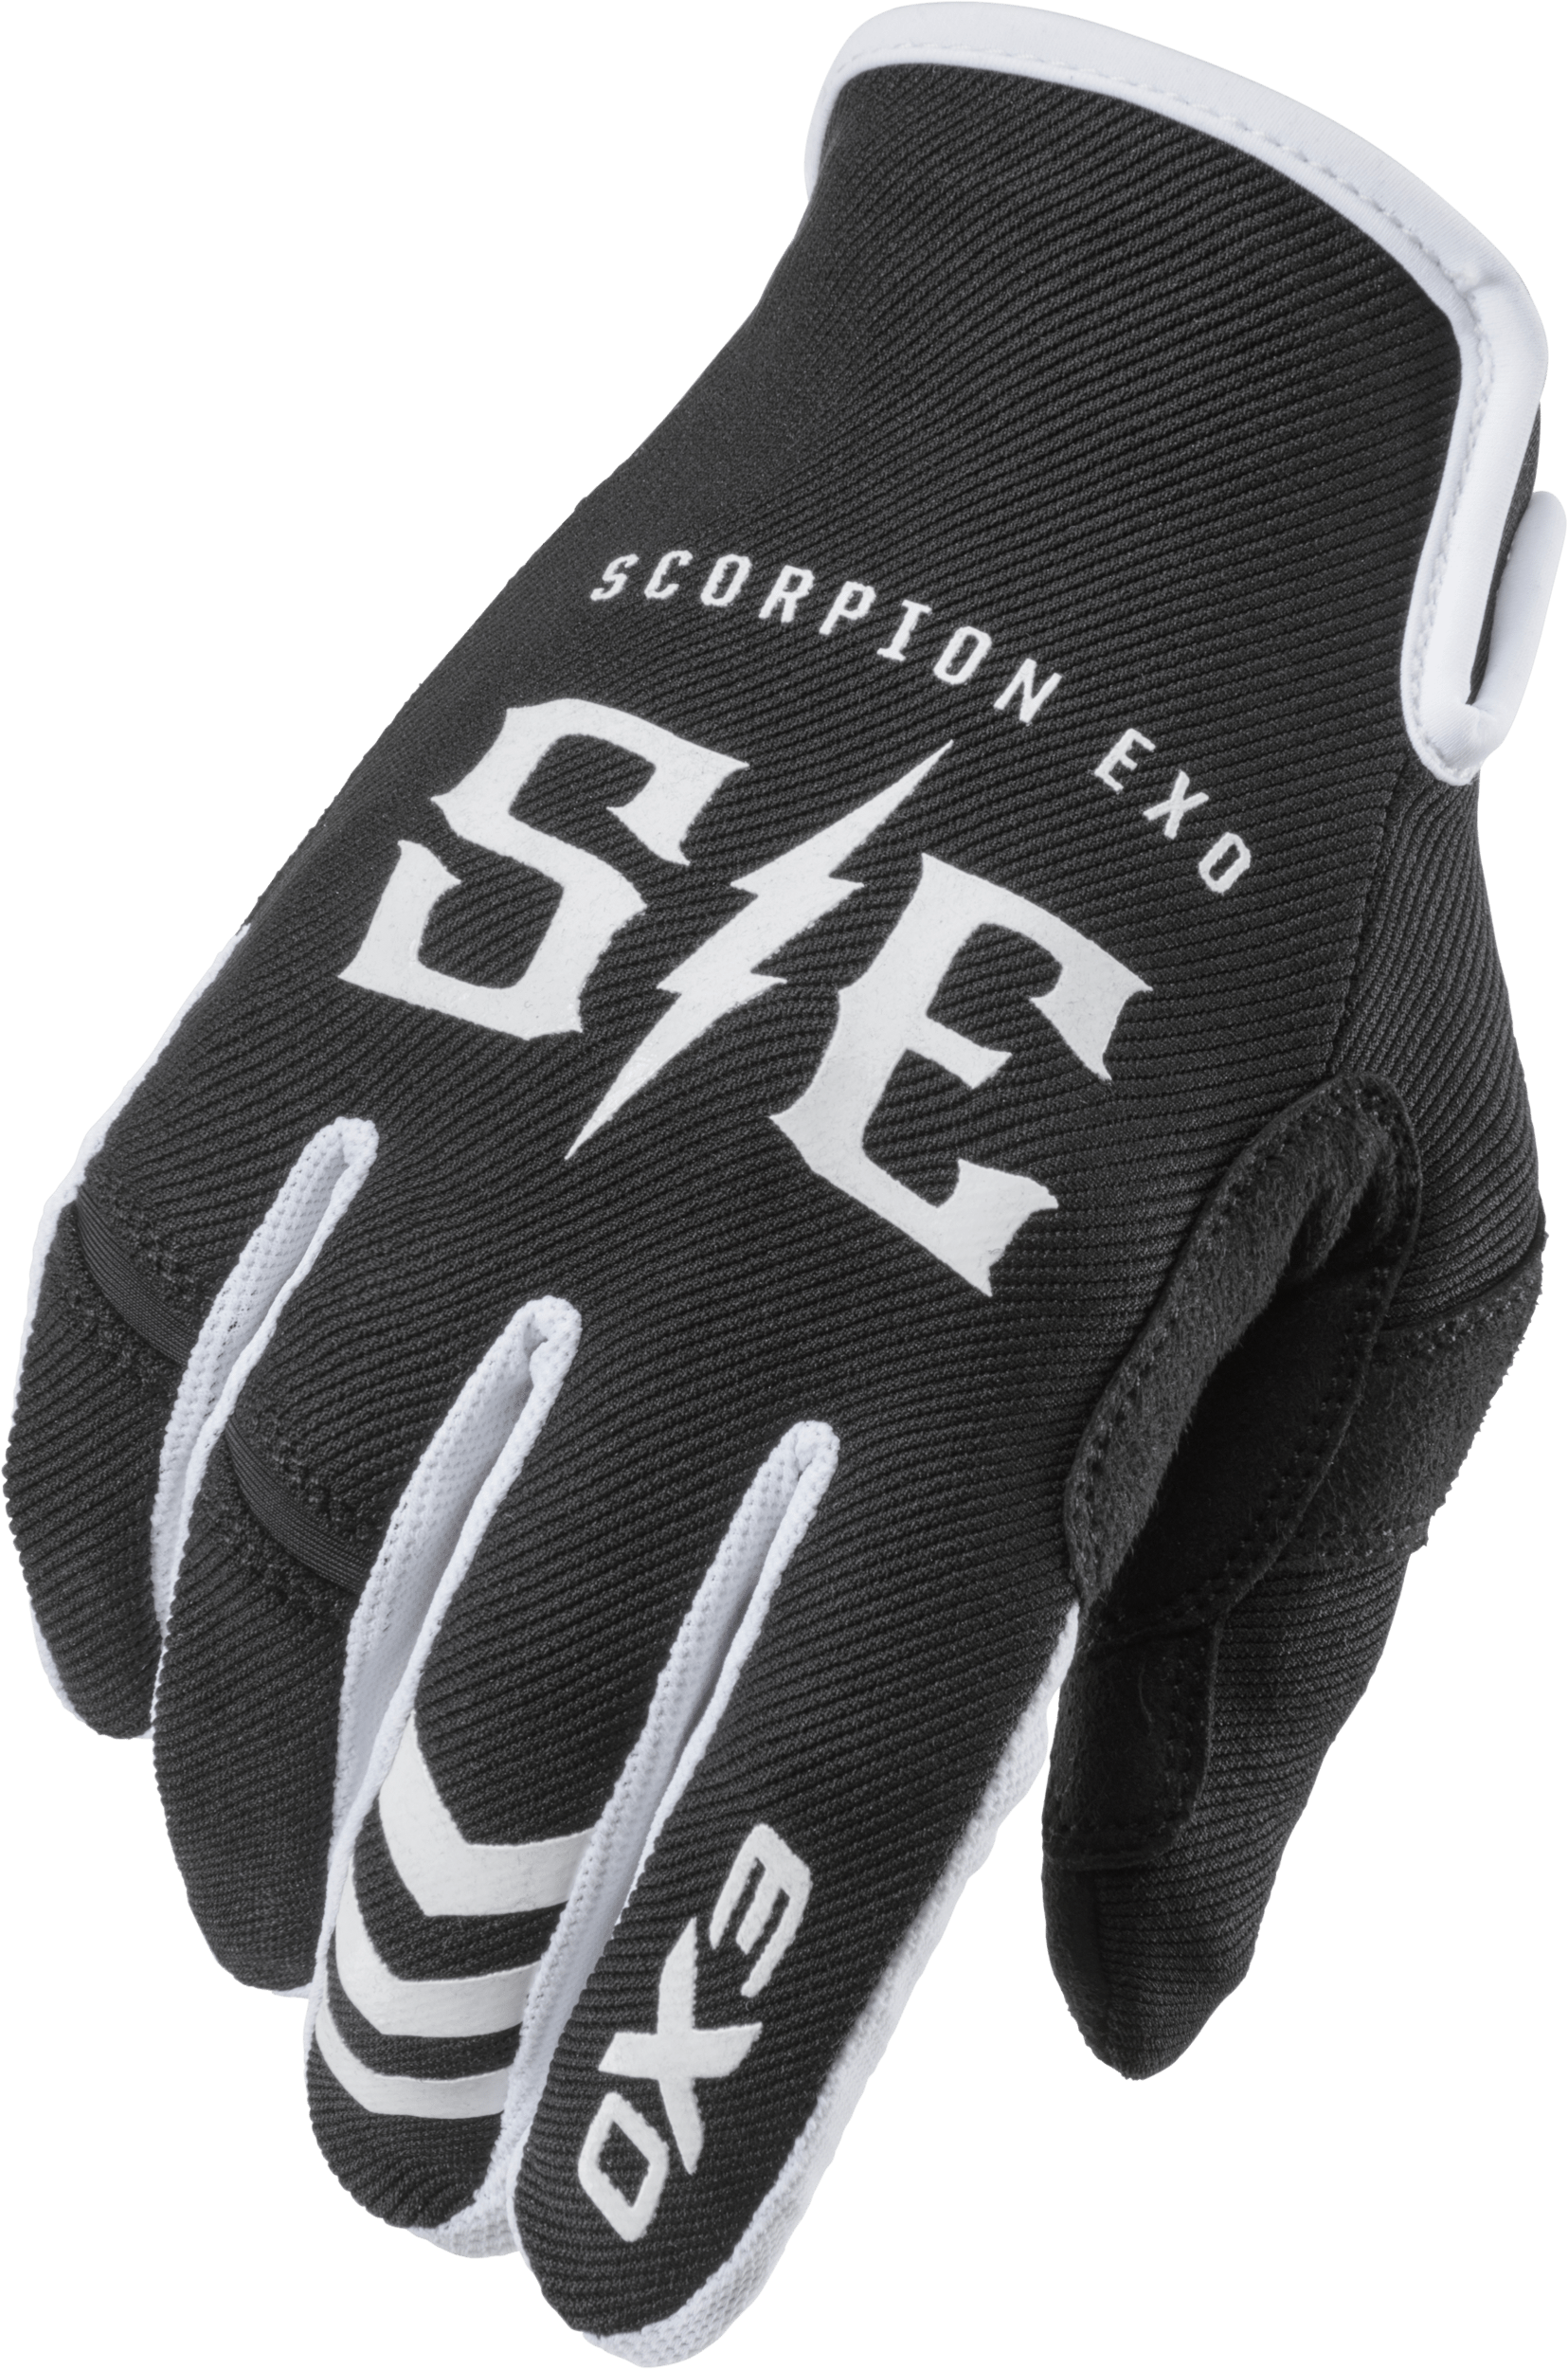 Western Powersports Gloves Black/White / 2X-Large Air-Stretch Charge Gloves by Scorpion Exo G44-037